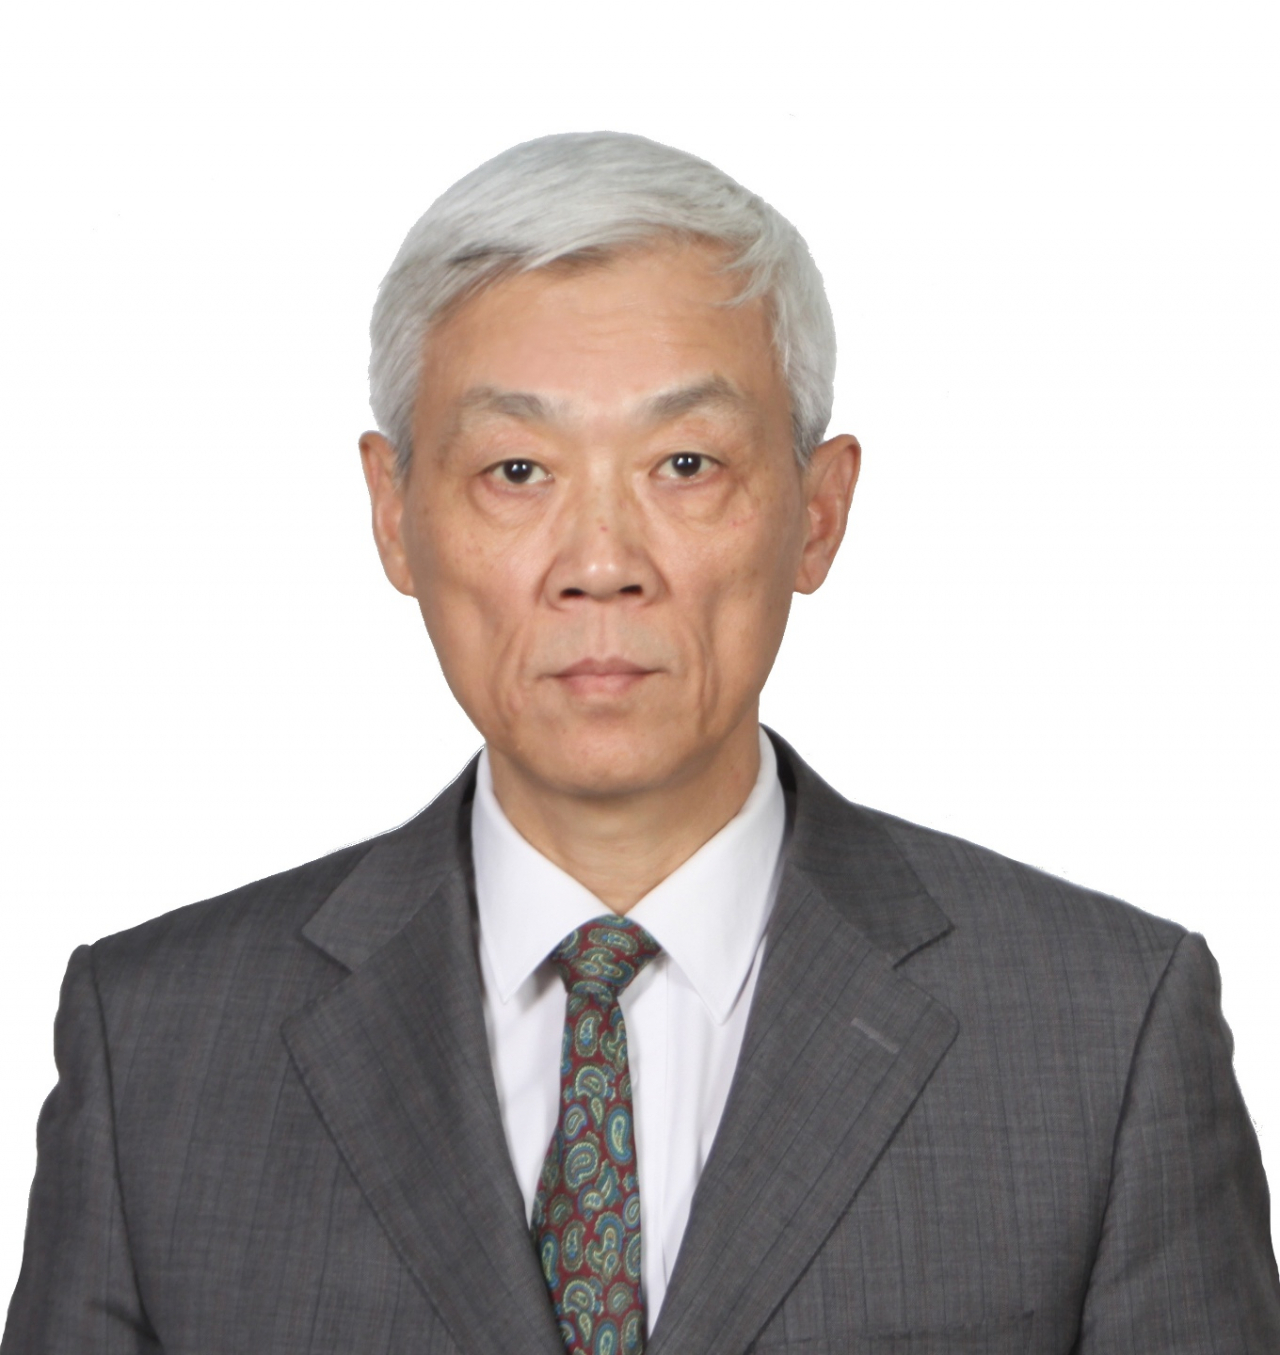 Zhang Tuosheng, an Academic Committee Member of Center for International Security and Strategy at Tsinghua University as well as the Senior Research Fellow at China Foundation for International and Strategic Studies